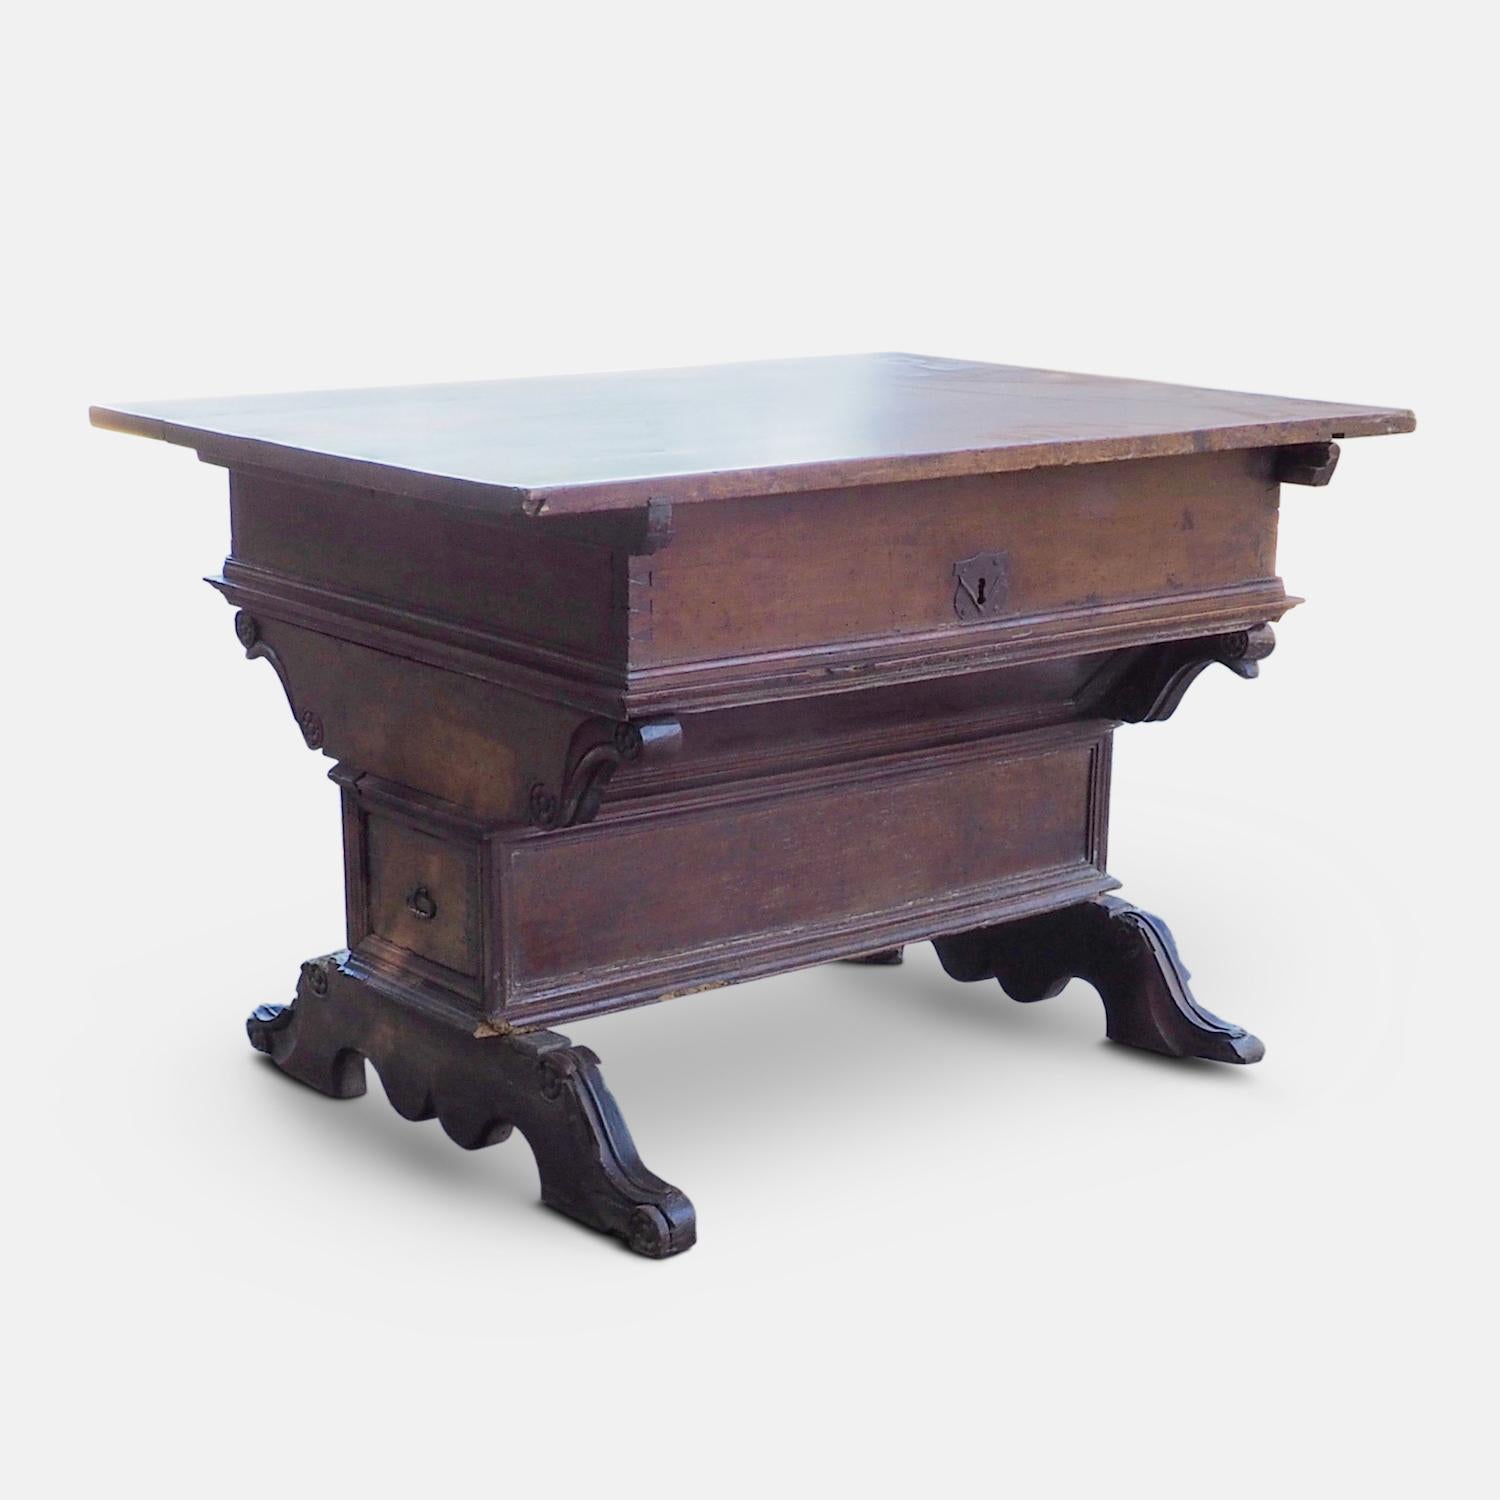 Very rare Renaissance merchant's desk from the late 16th century. A beautiful desk decorated with carved foliate roundels and mitred trim of walnut.  This table has an exceptionally nice form and color. The sliding top opening to a large compartment